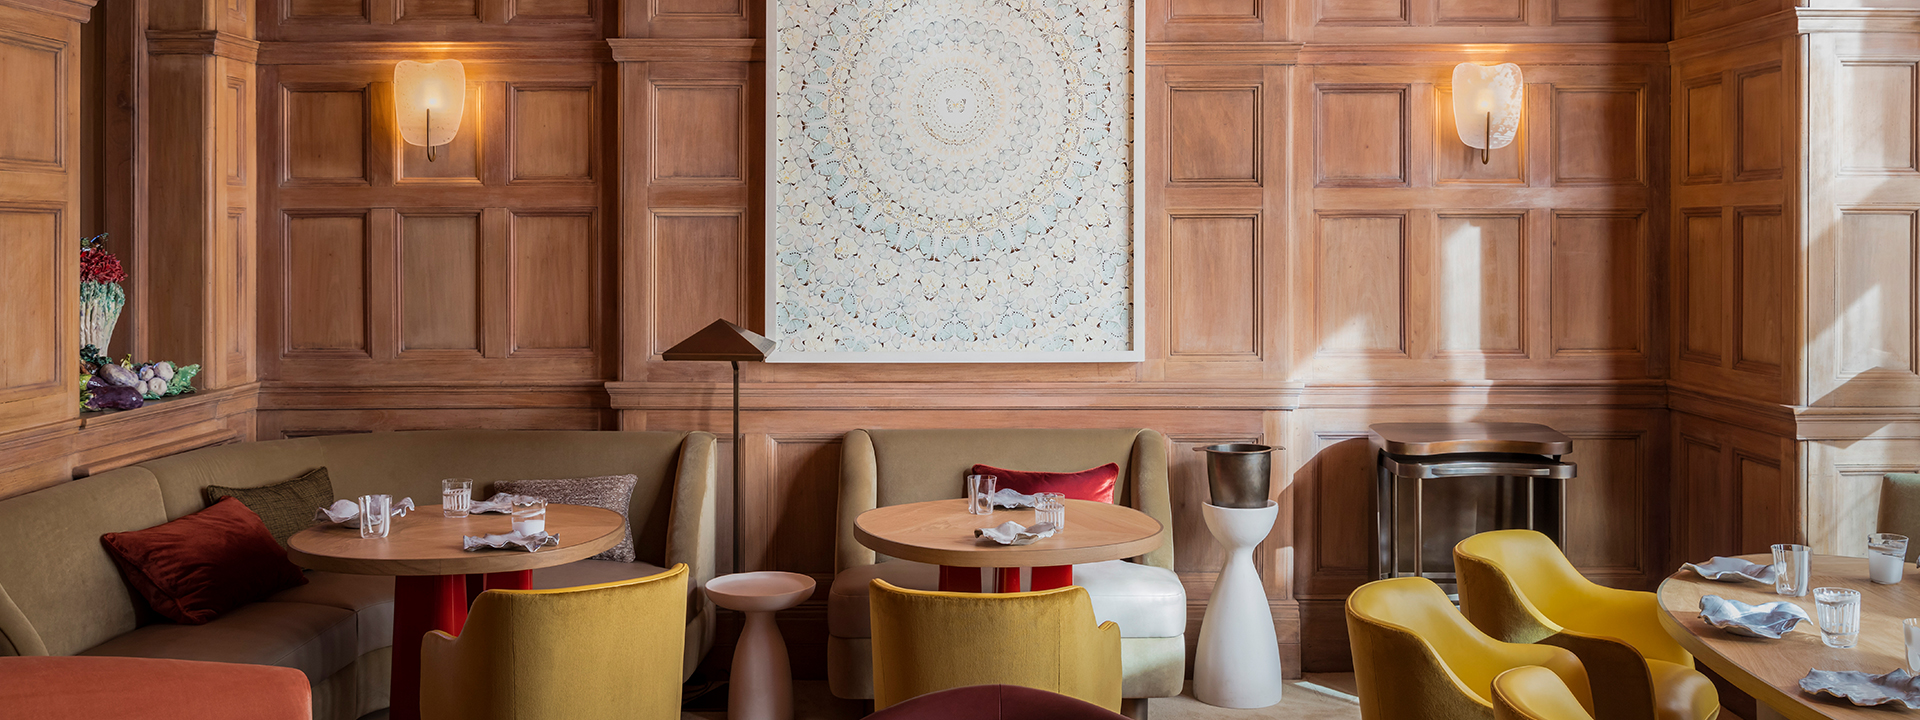 Hélène Darroze at The Connaught - restaurant room with tables set up and artwork on the wall.n